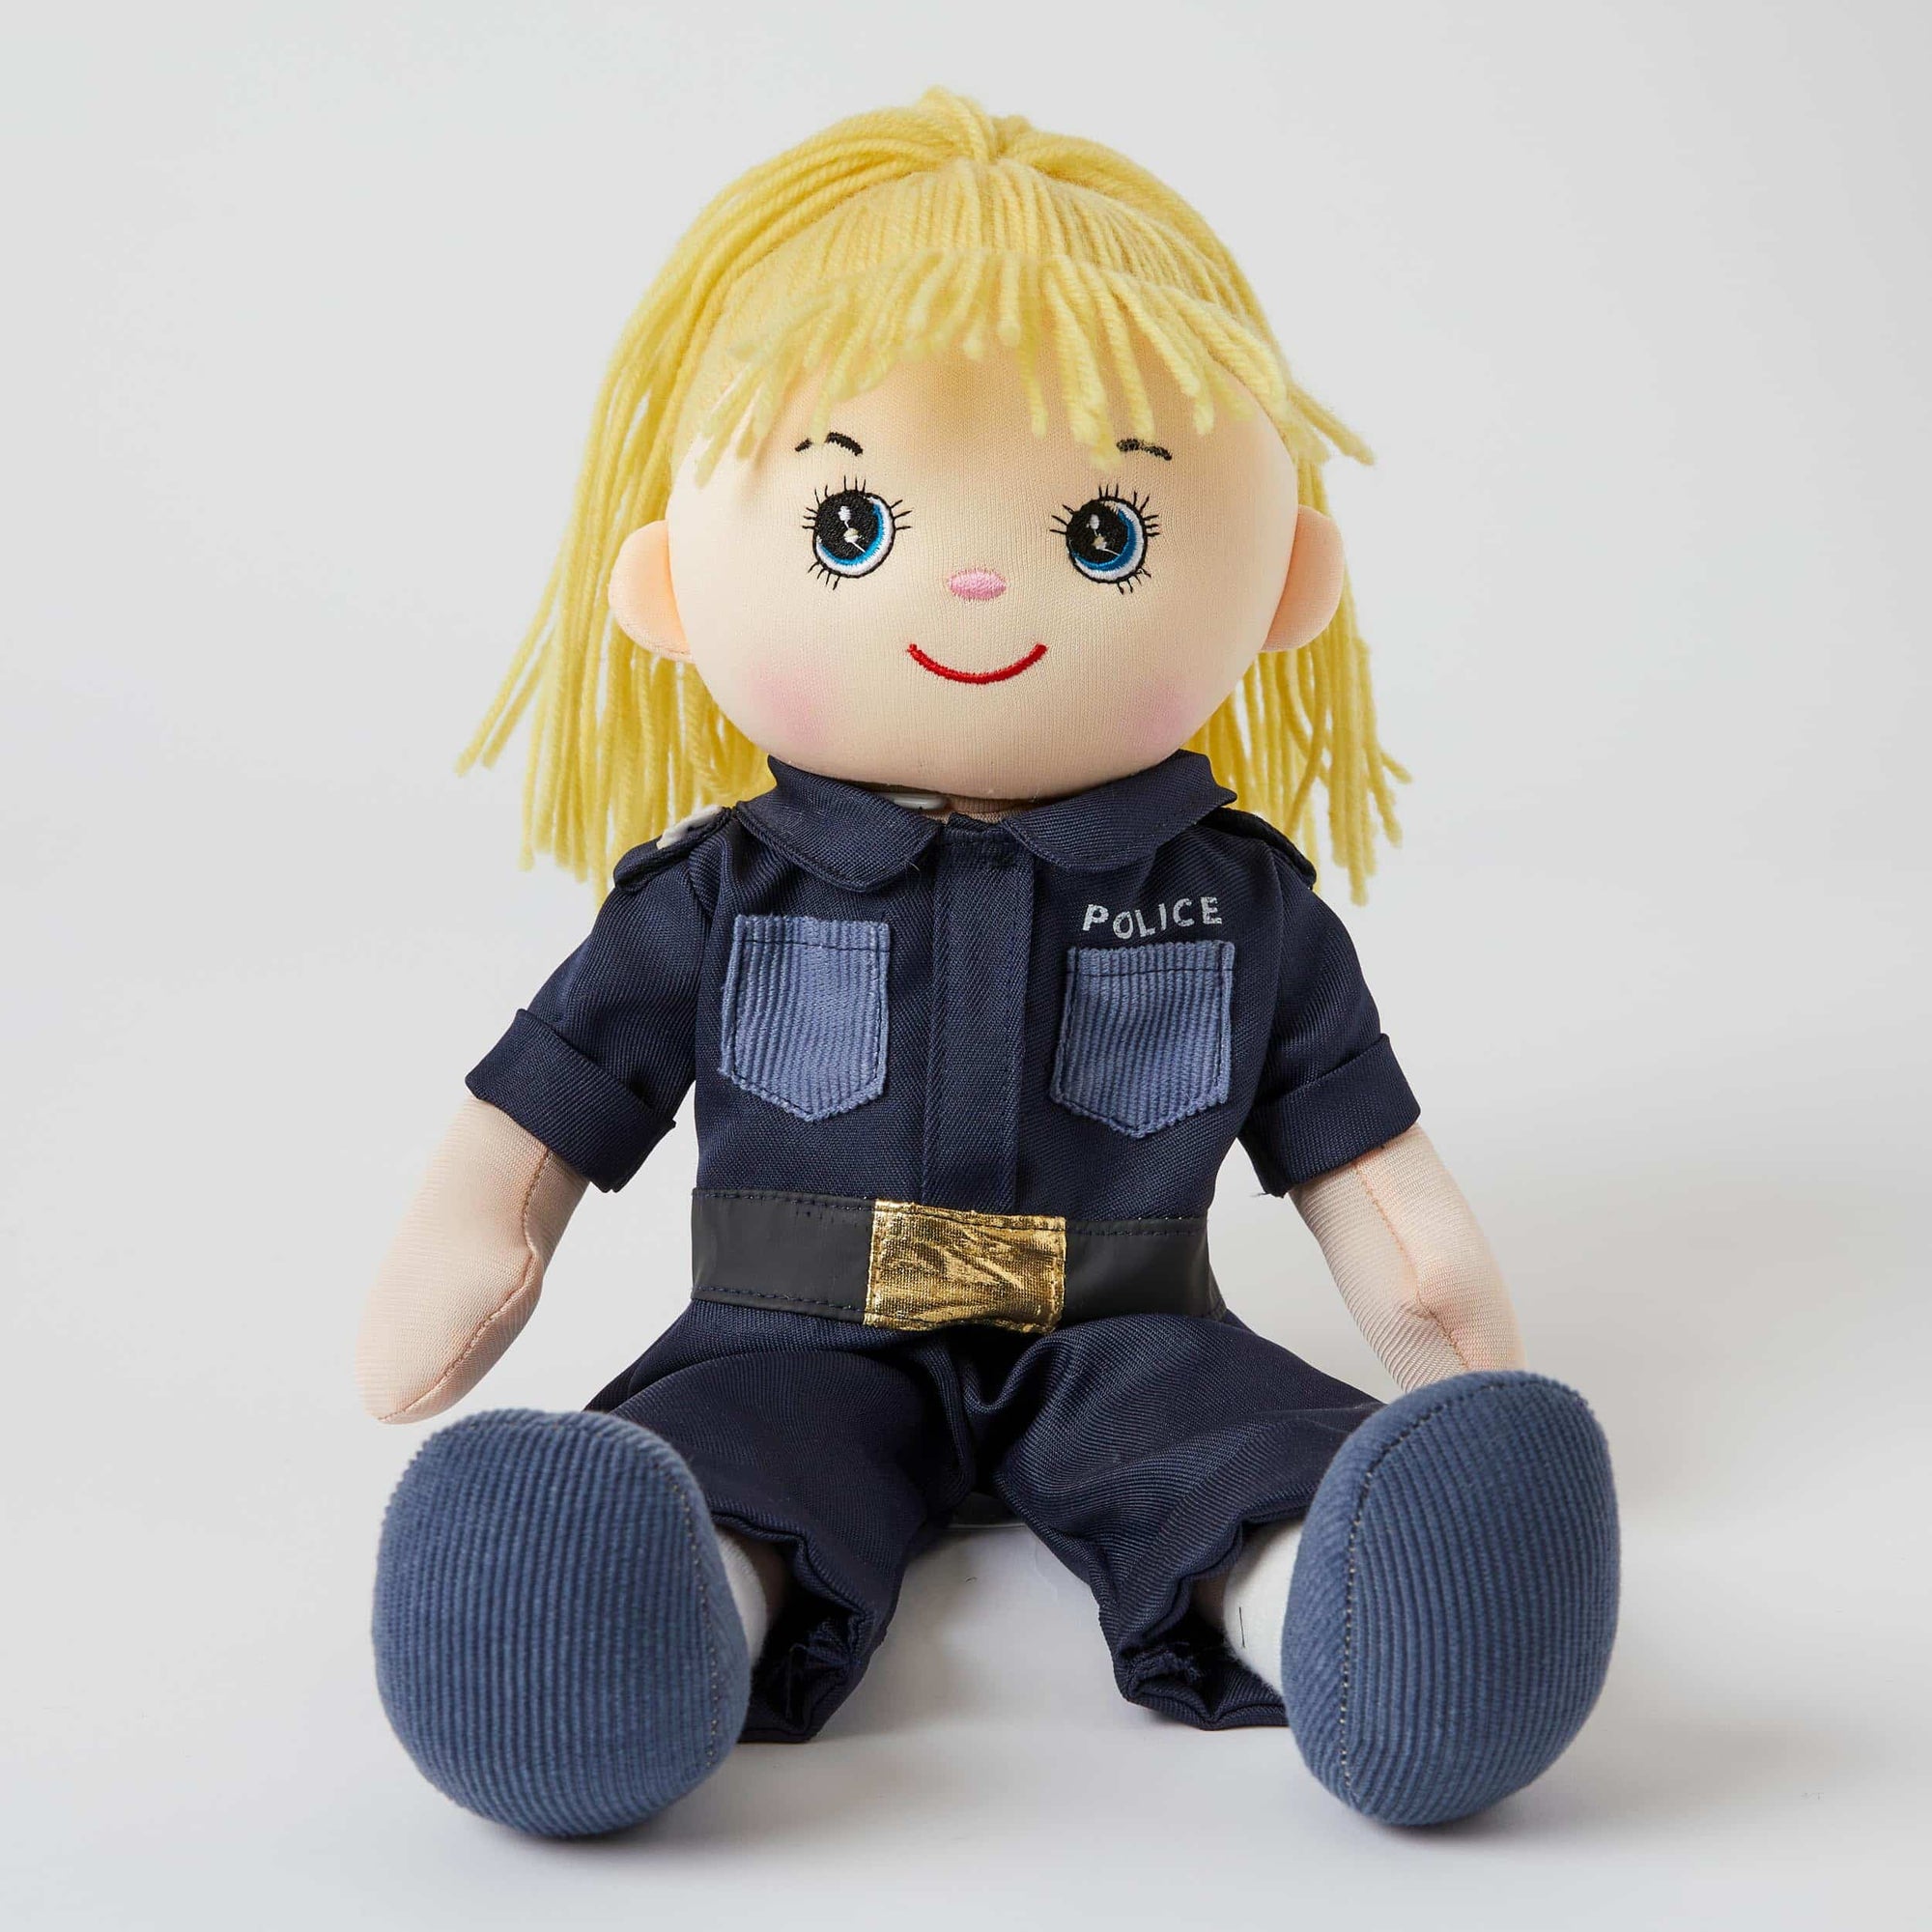 My Best Friend Lizzy - Police Officer Doll - Girl